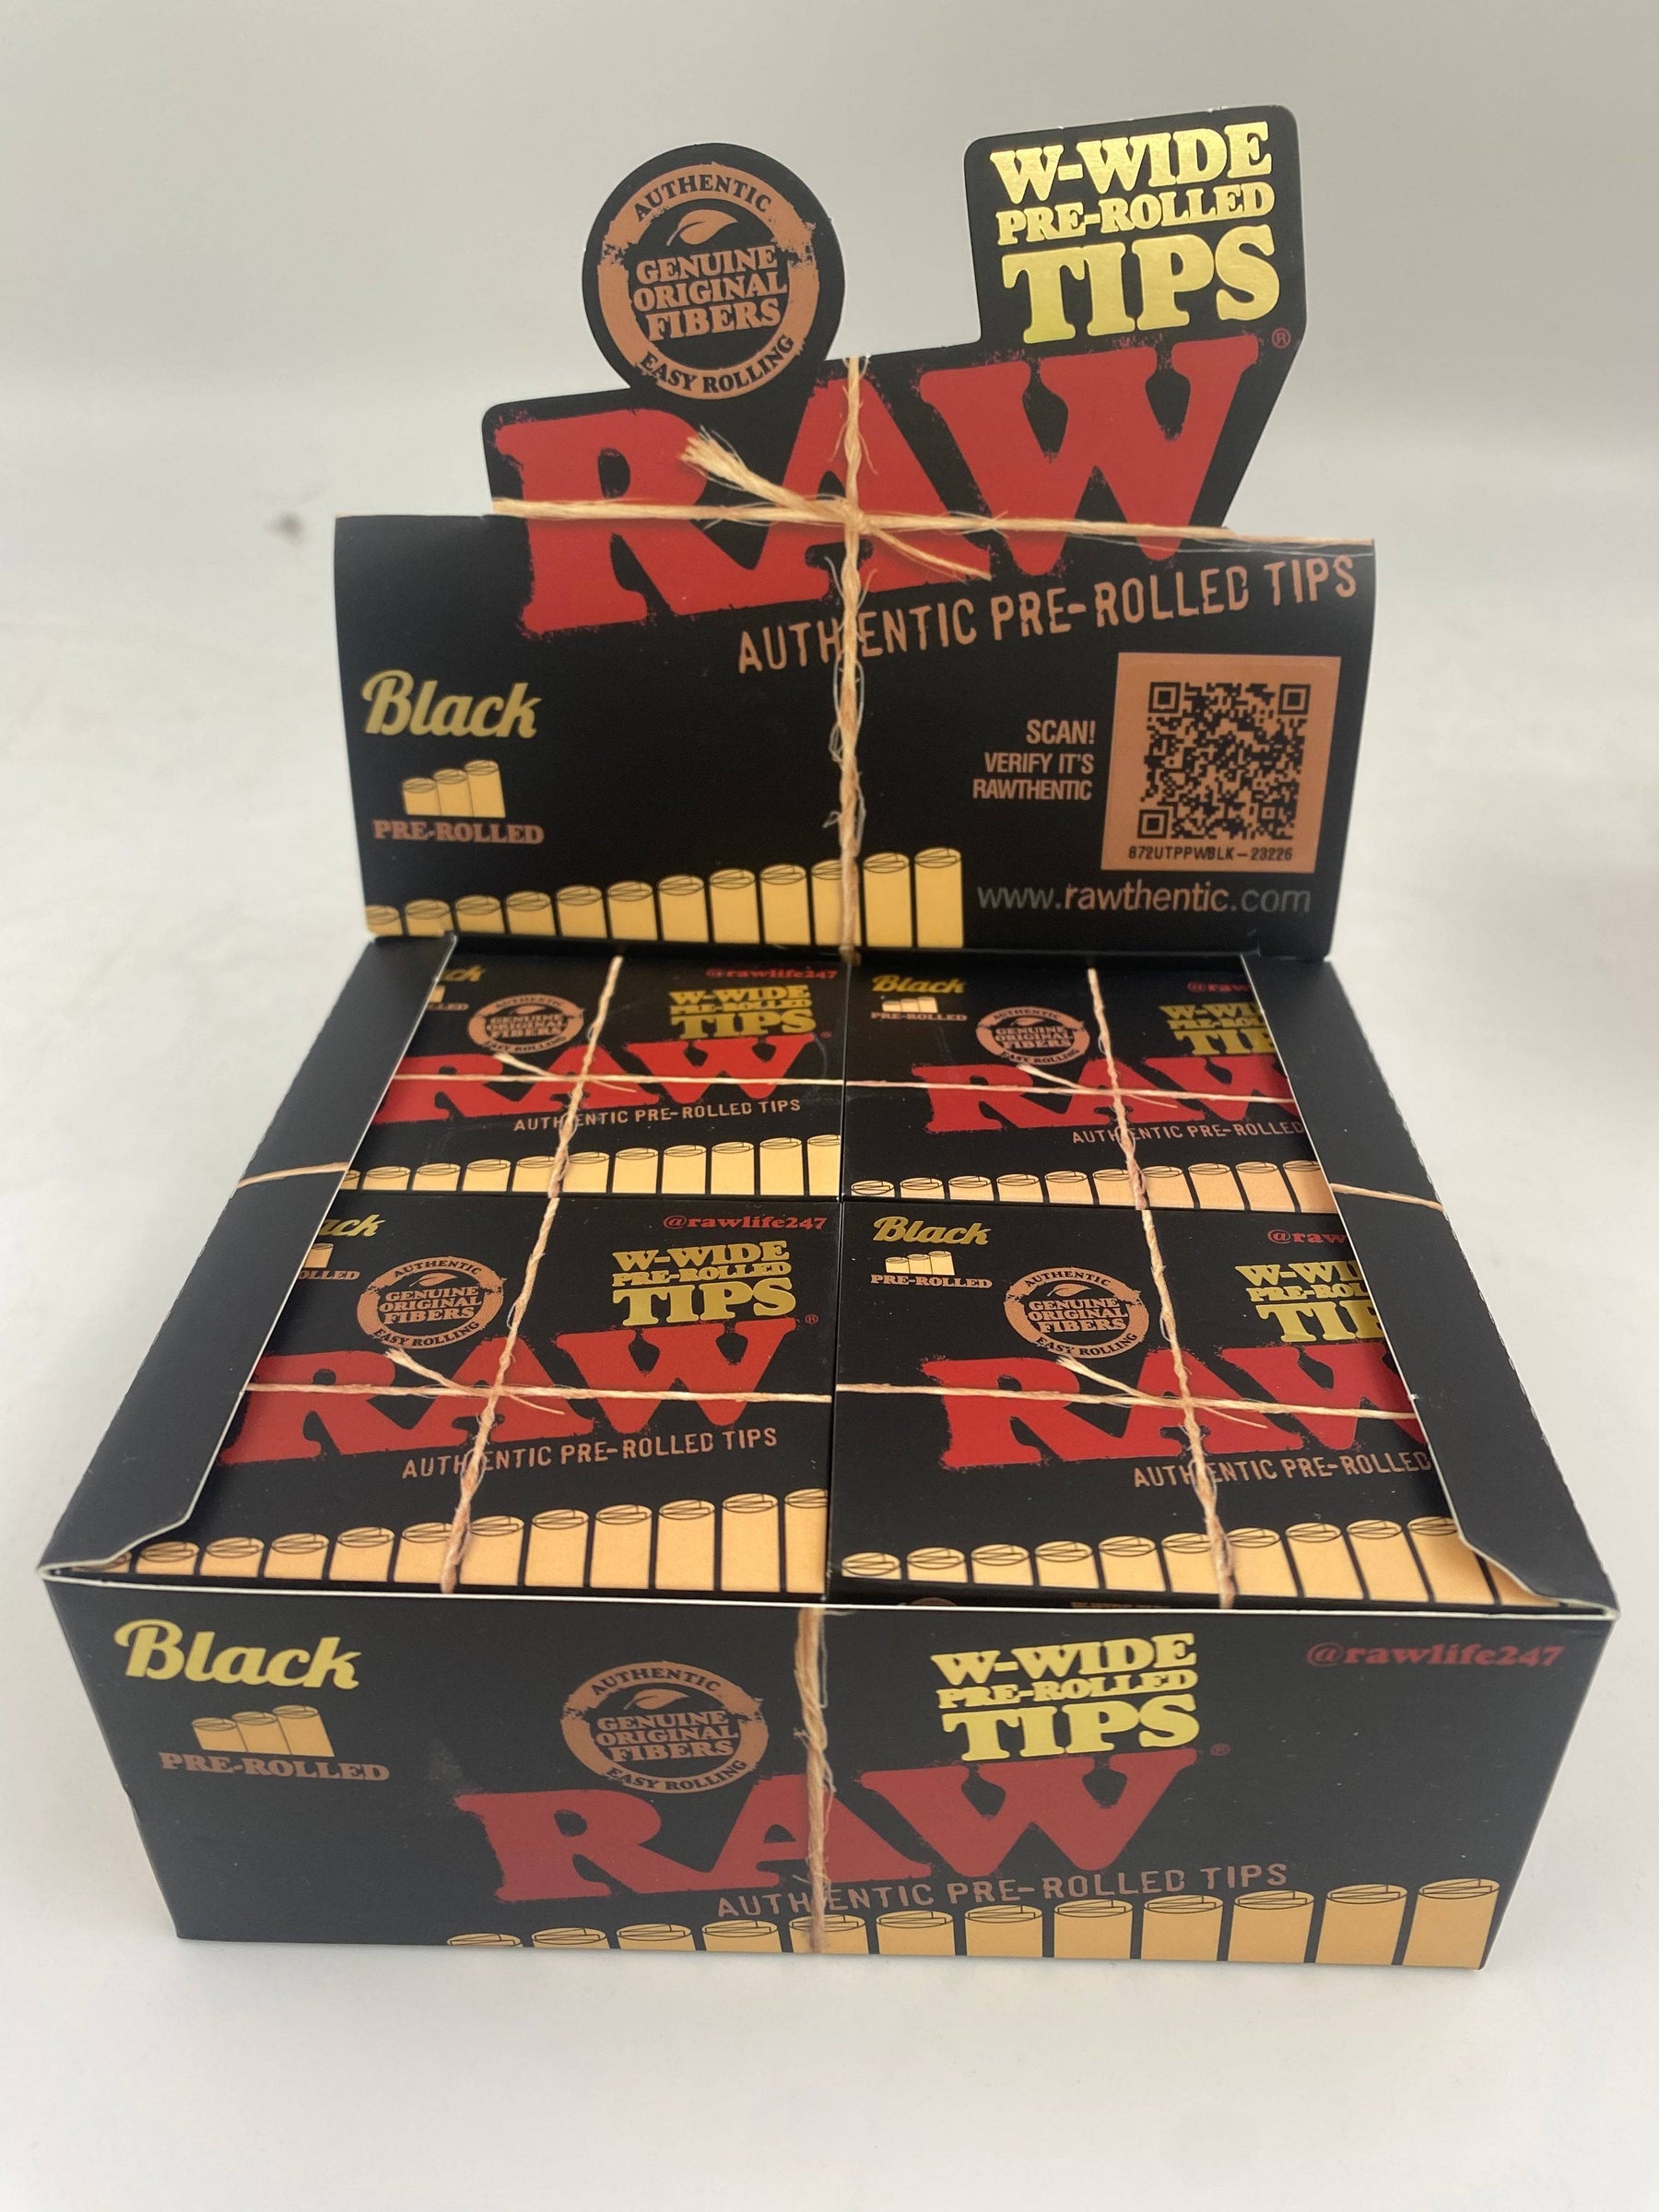 RAW Pre-Rolled Wide Tips